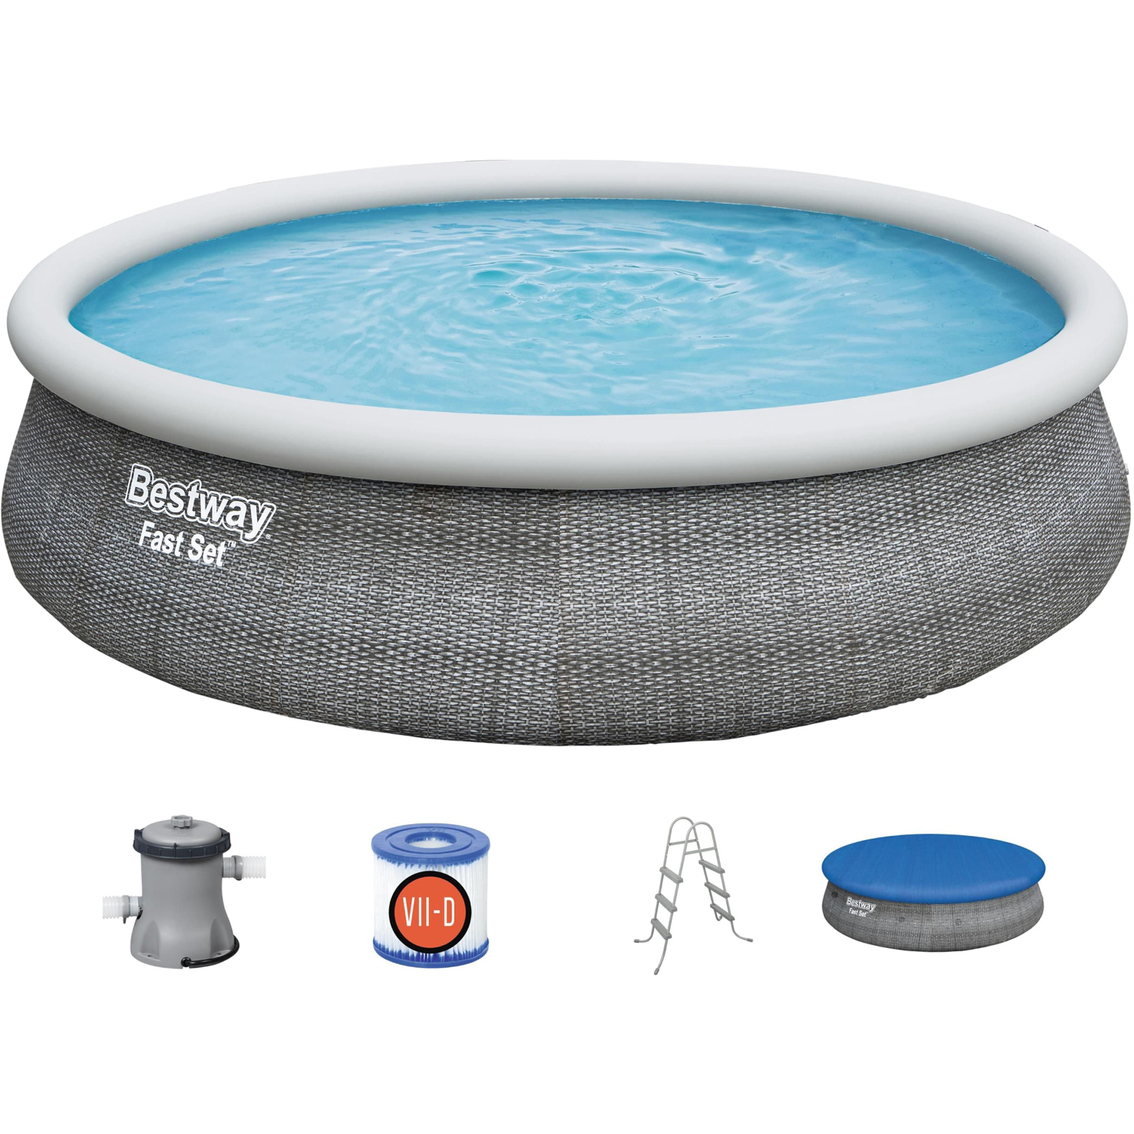 Bestway Fast Set 15 ft. Round Inflatable Pool Set - Image 5 of 5